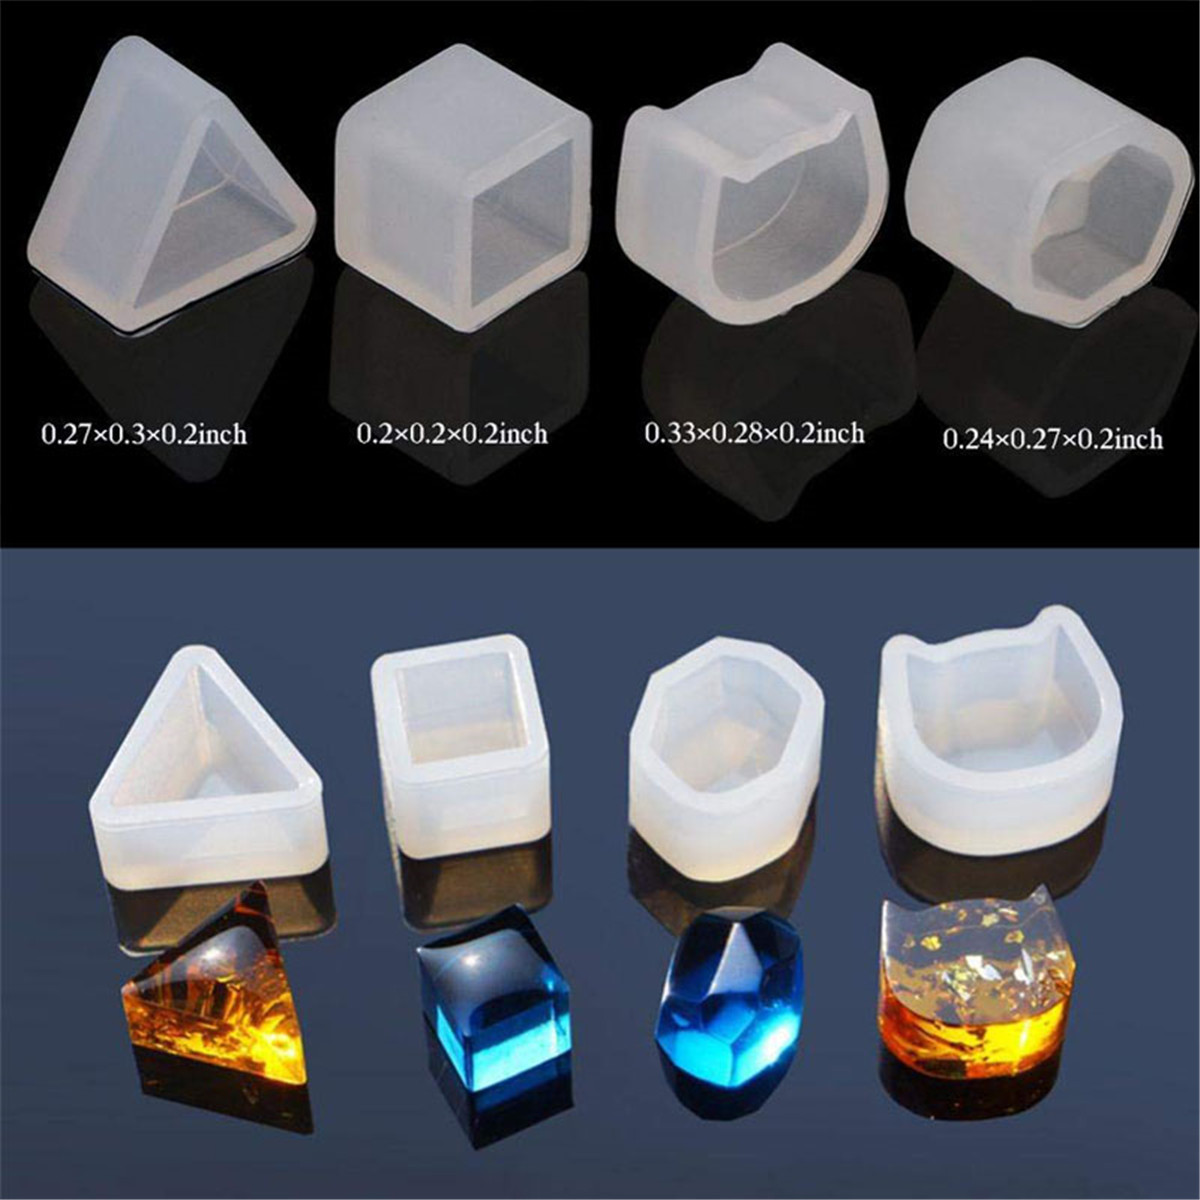 285Pcs-Resin-Casting-Molds-Kit-Silicone-Making-Jewelry-DIY-Pendant-Craft-Mould-Tools-Kit-1808480-4